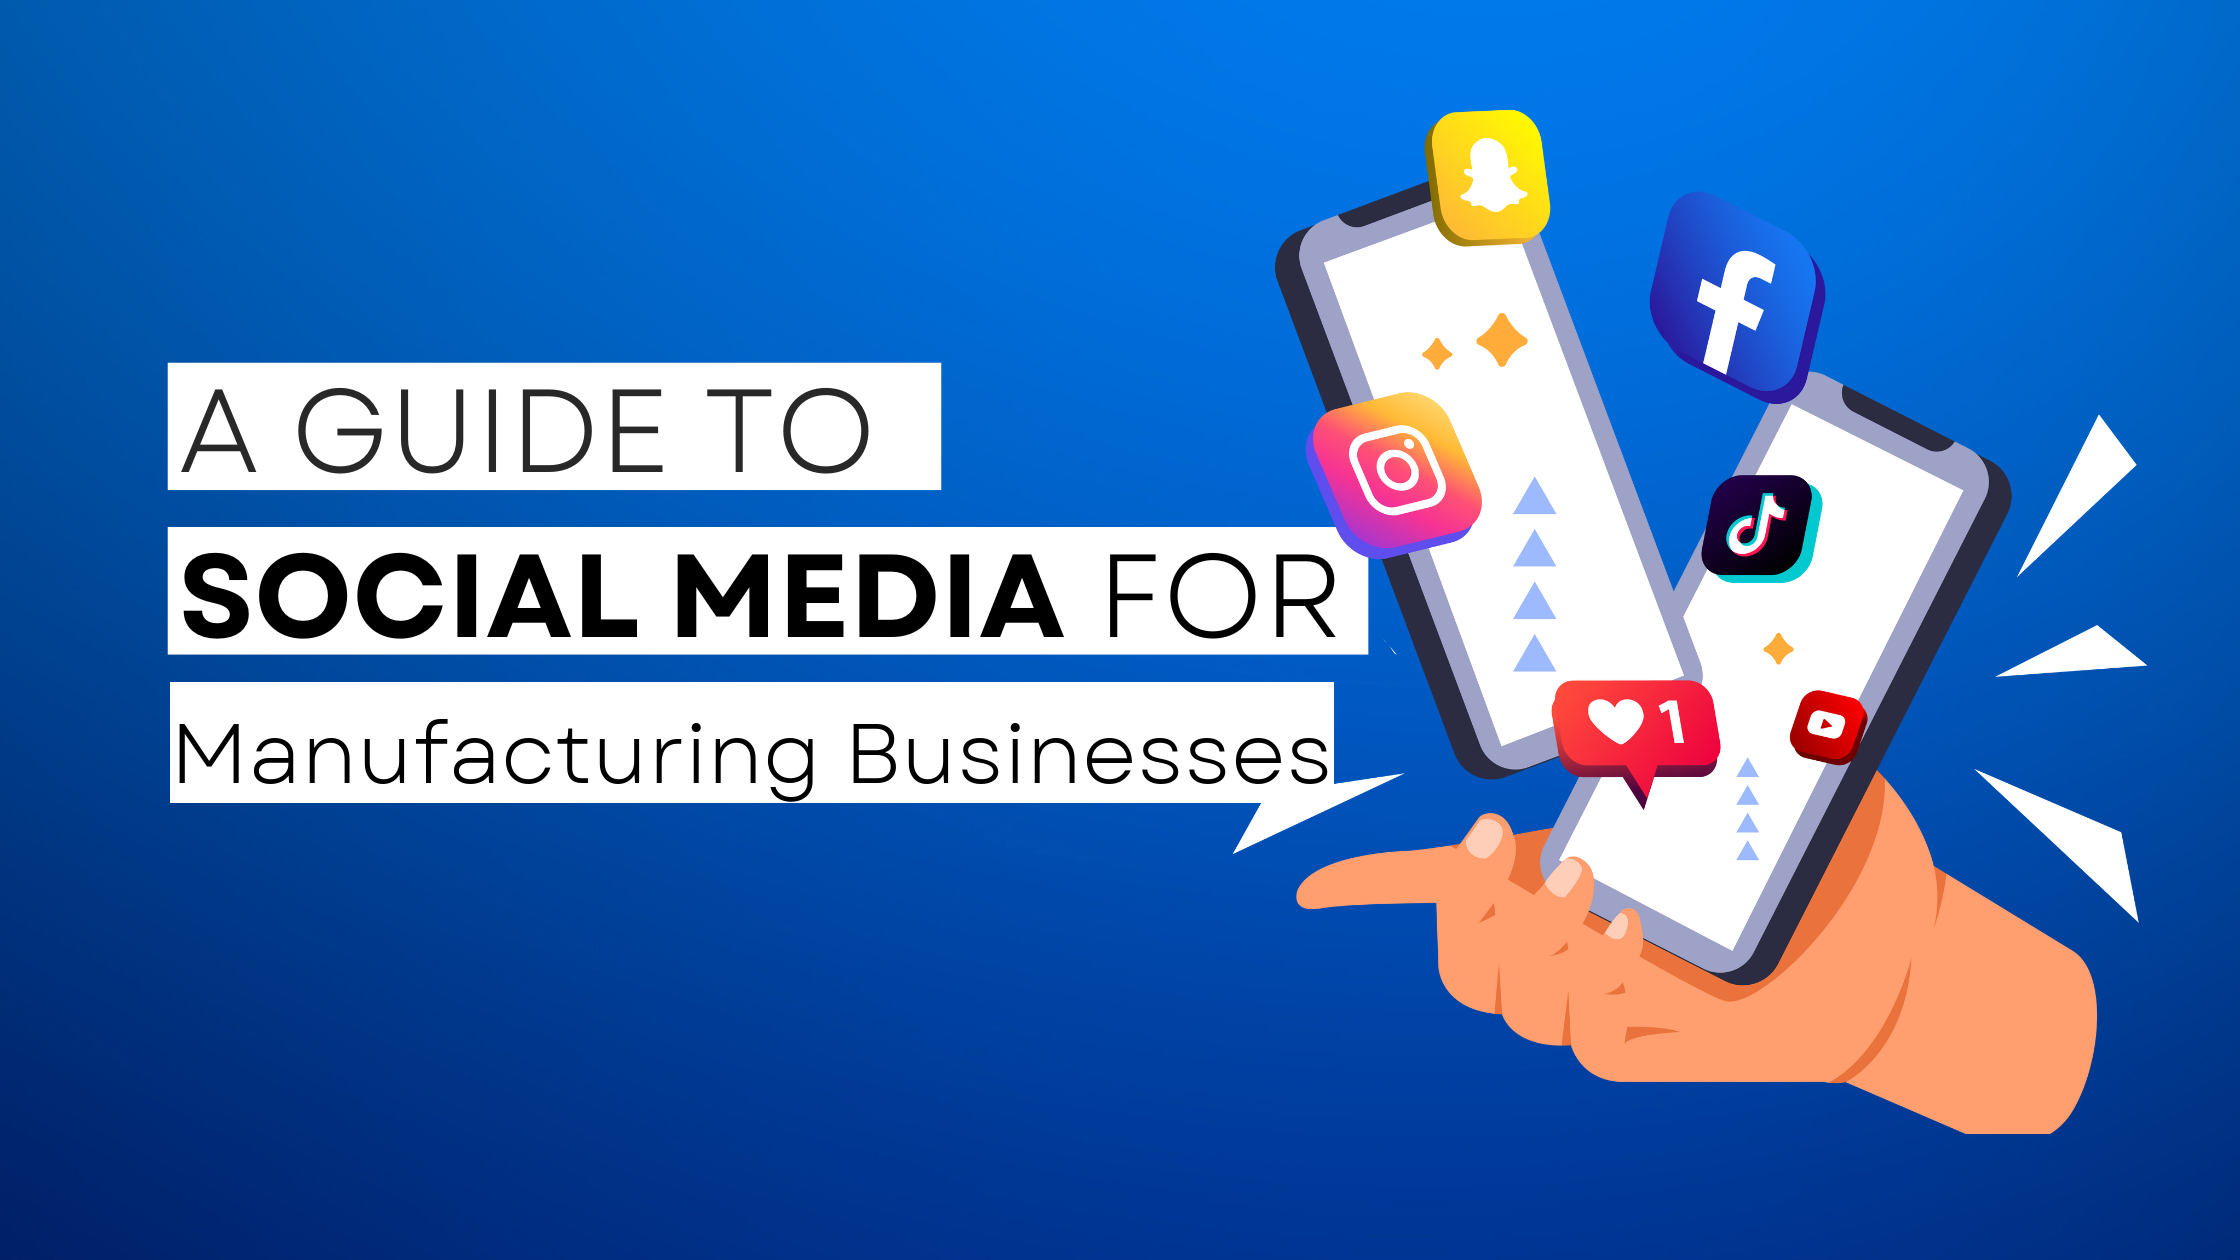 How to start Manufacturing on social media